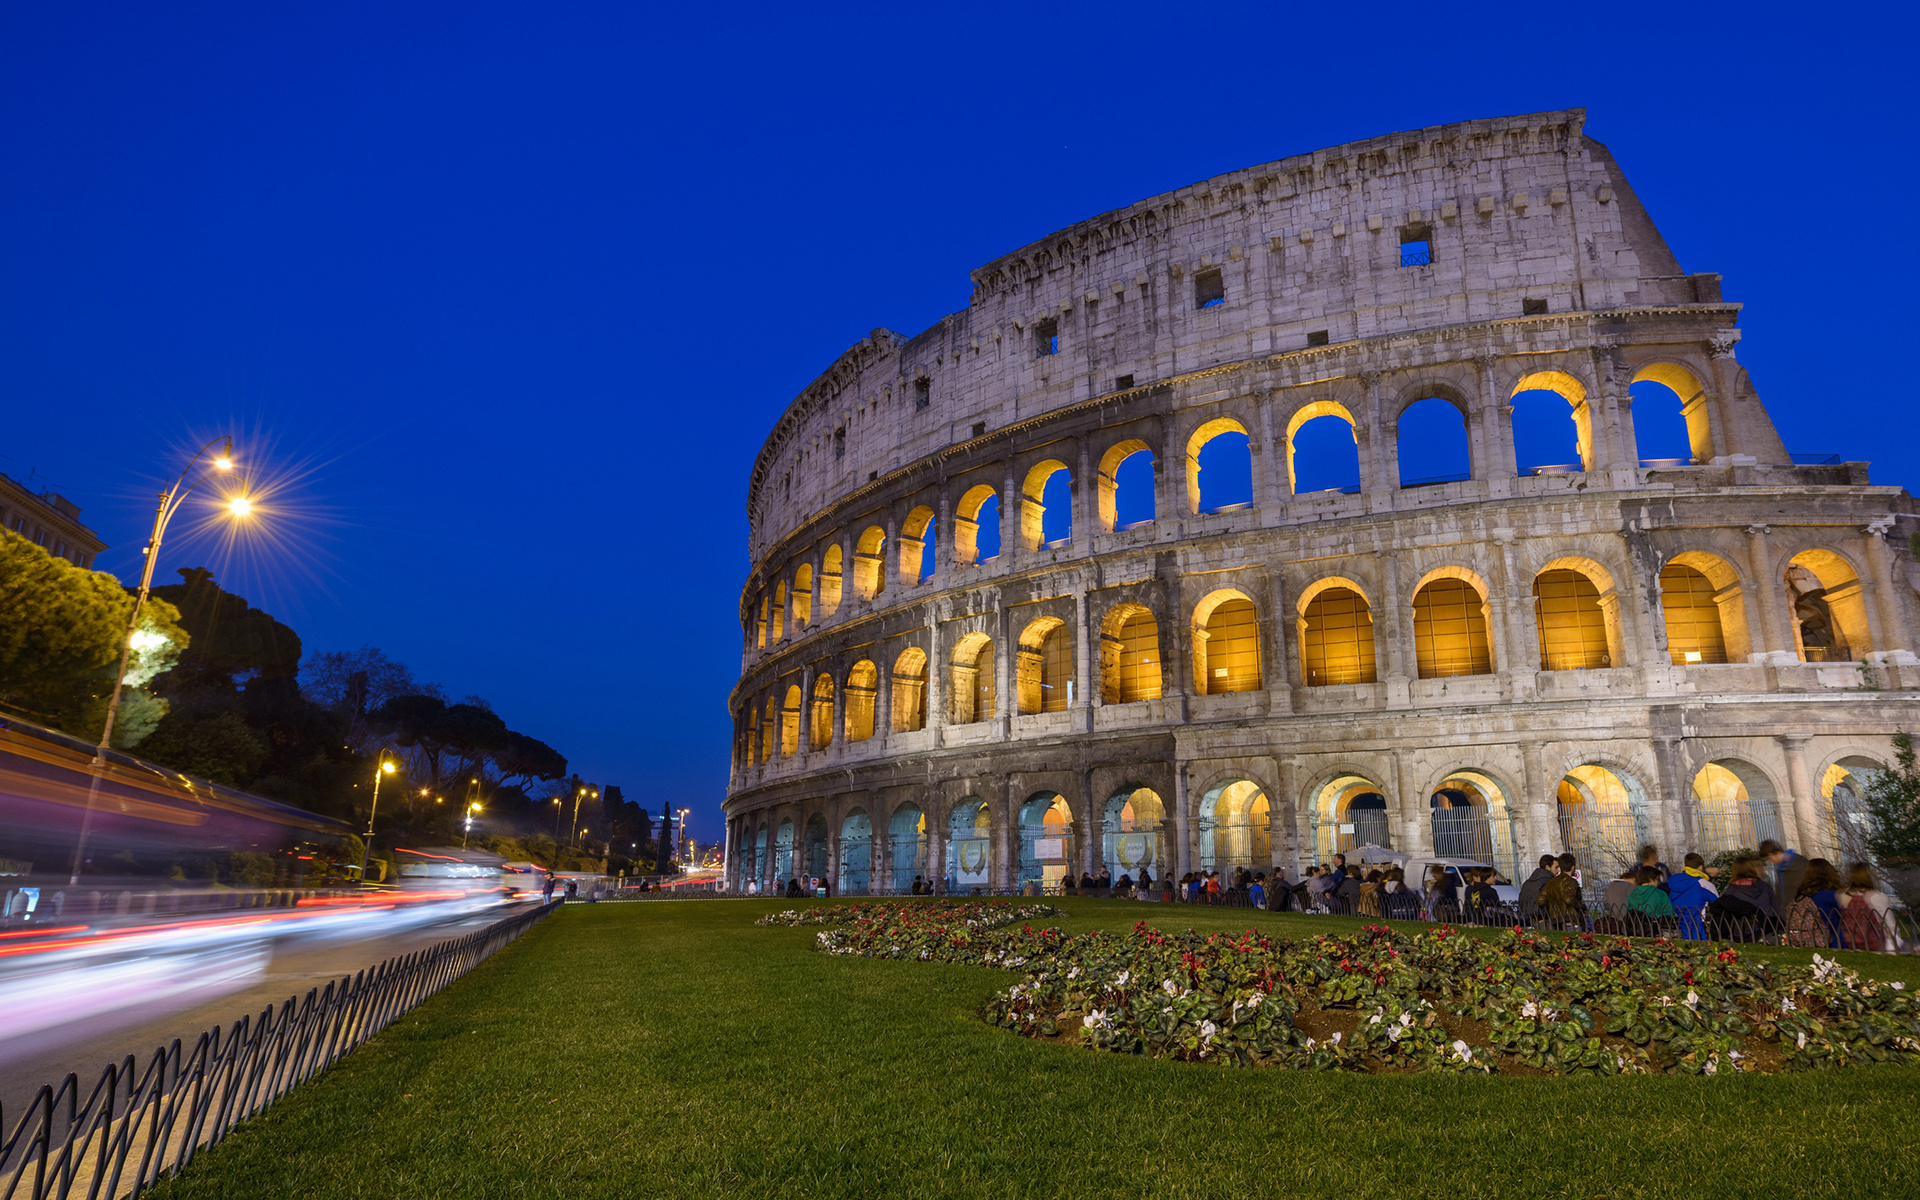 Rome: Colosseum at night, Italy, Architecture. 1920x1200 HD Wallpaper.